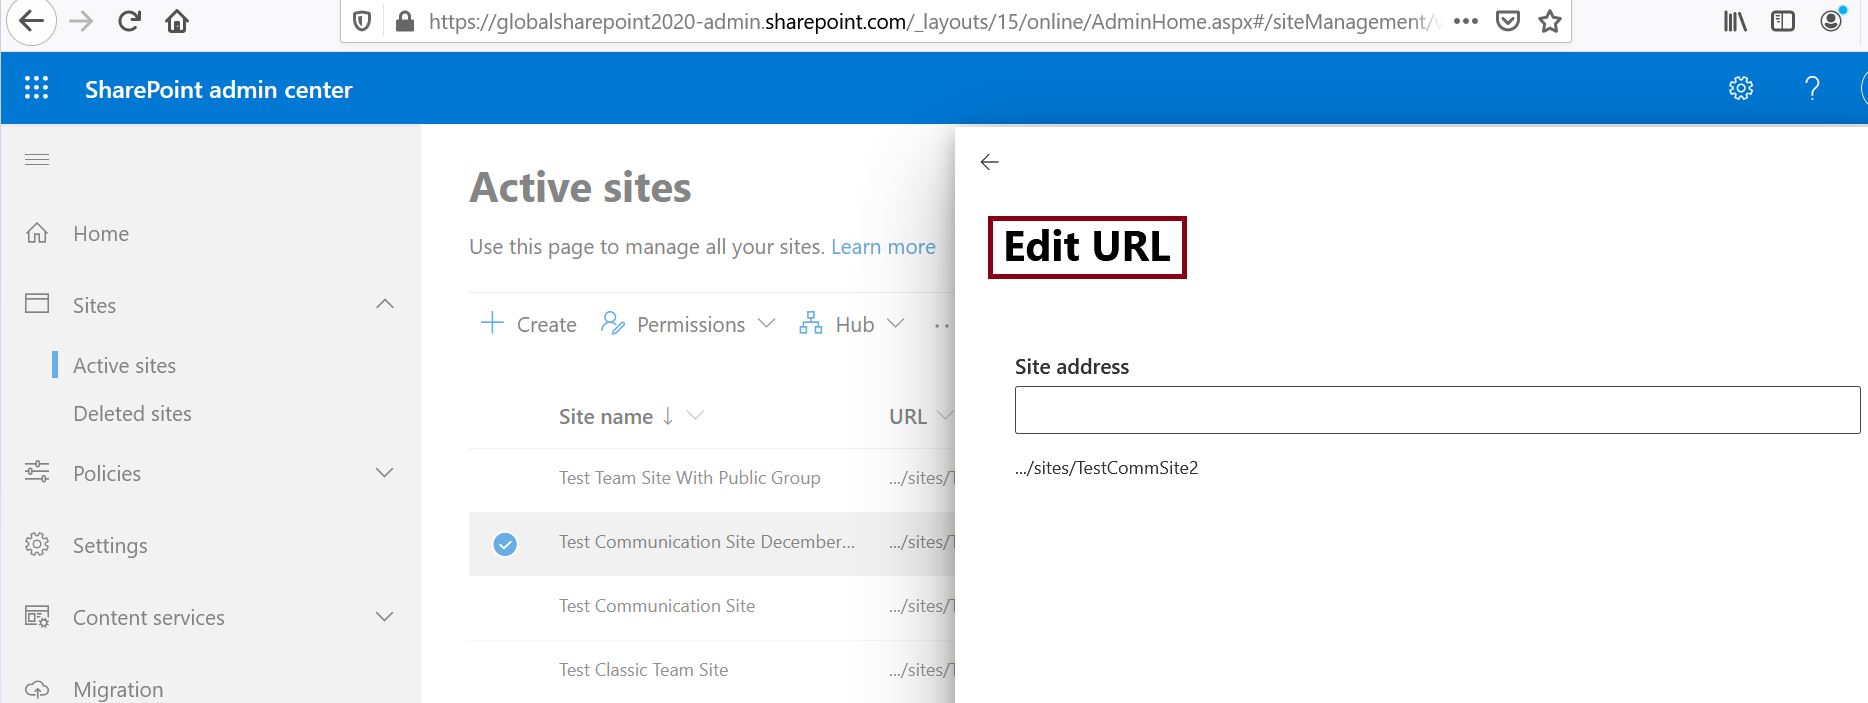 Edit URL in SharePoint Online from SharePoint admin center, change site URL in SharePoint online